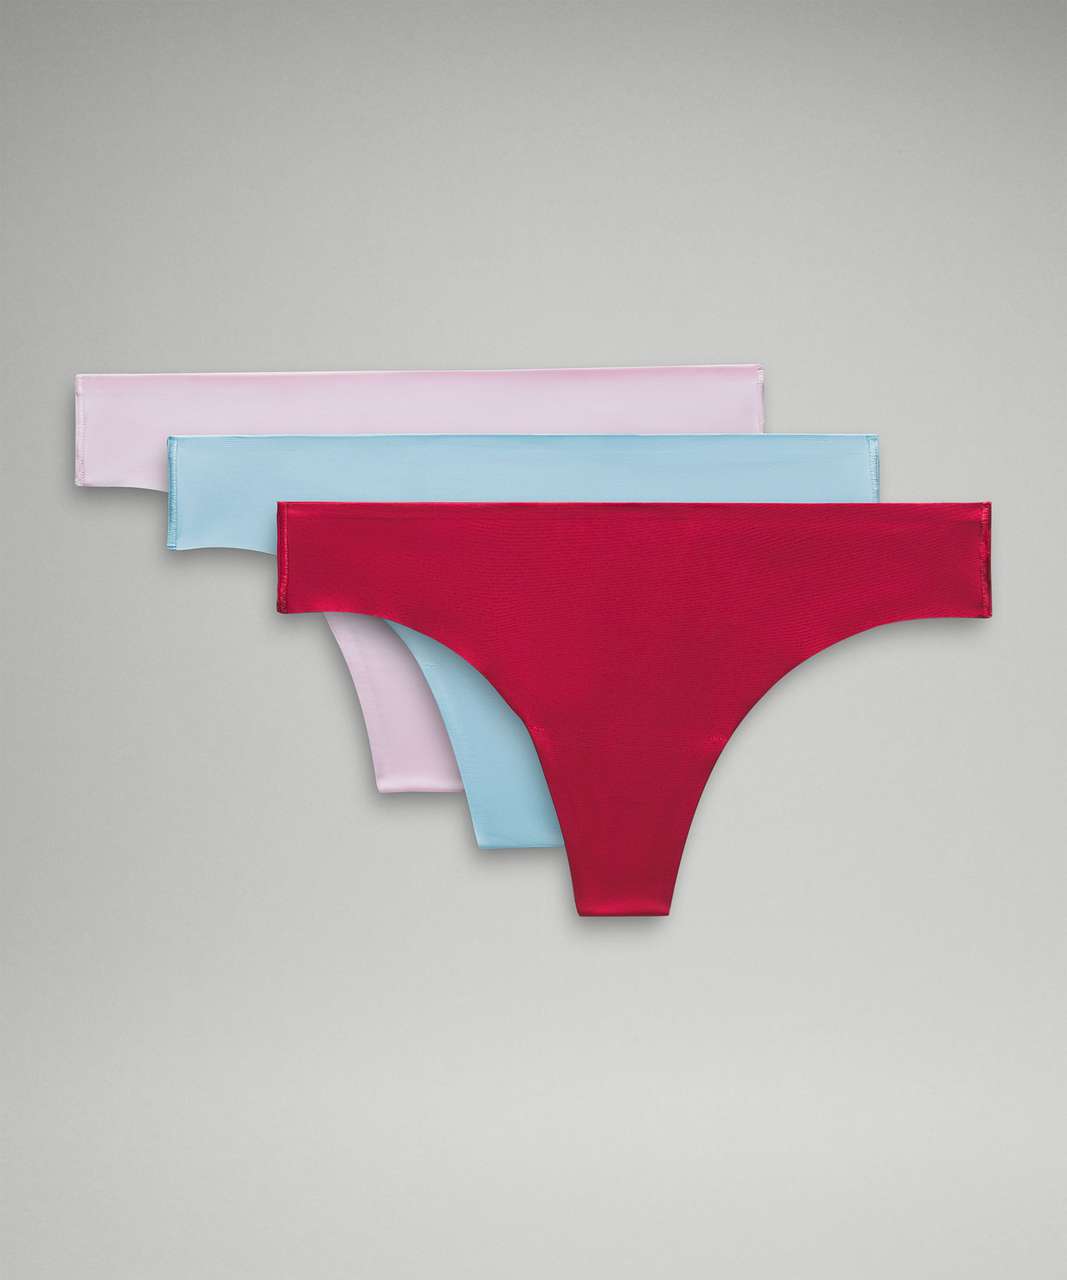 Invisiwear Mid-rise Thong Underwear In Java